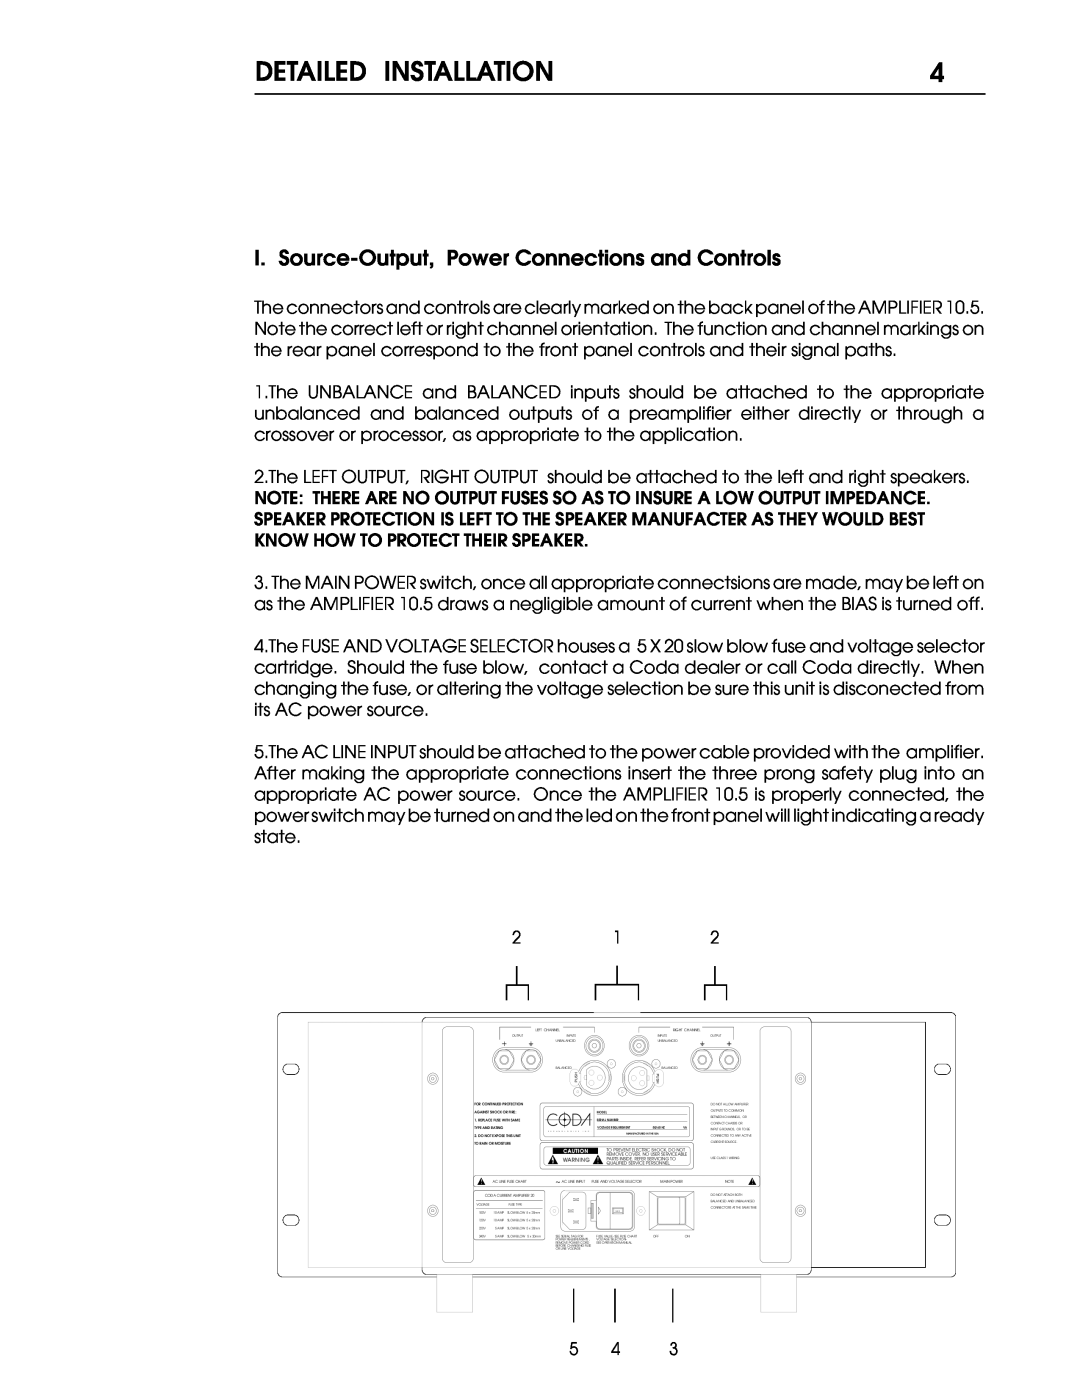 Coda 10.5 operation manual I. Source-Output,Power Connections and Controls 